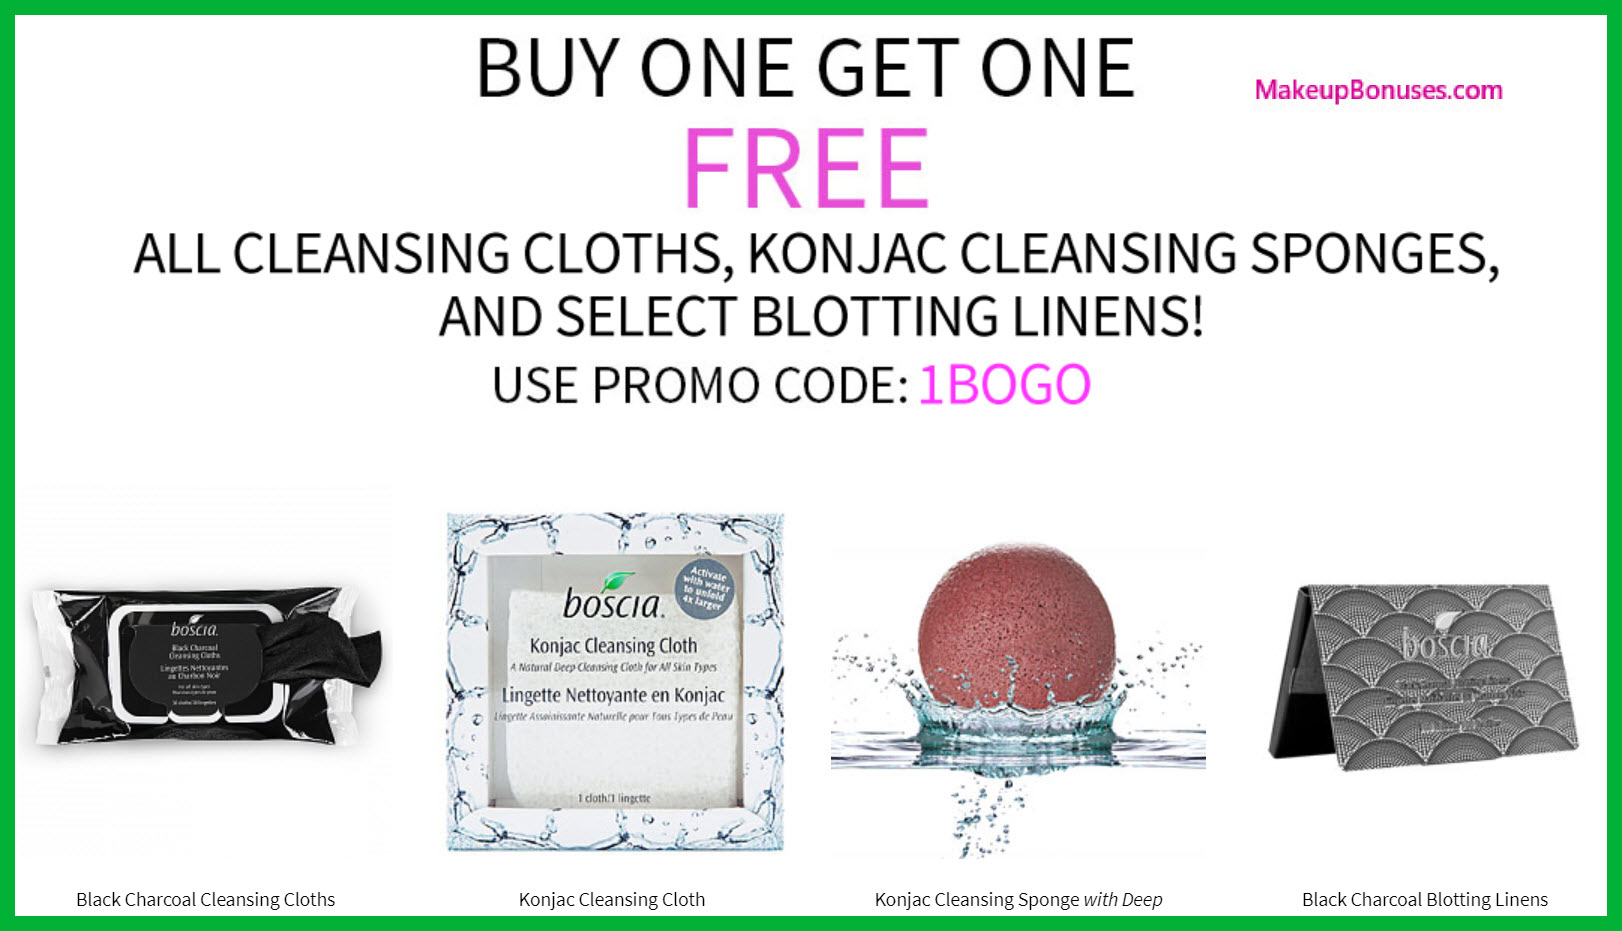 Receive a free 3-pc gift with your 3+ Cleansing Cloths, Konjac Sponges, Select Blotting Linens purchase